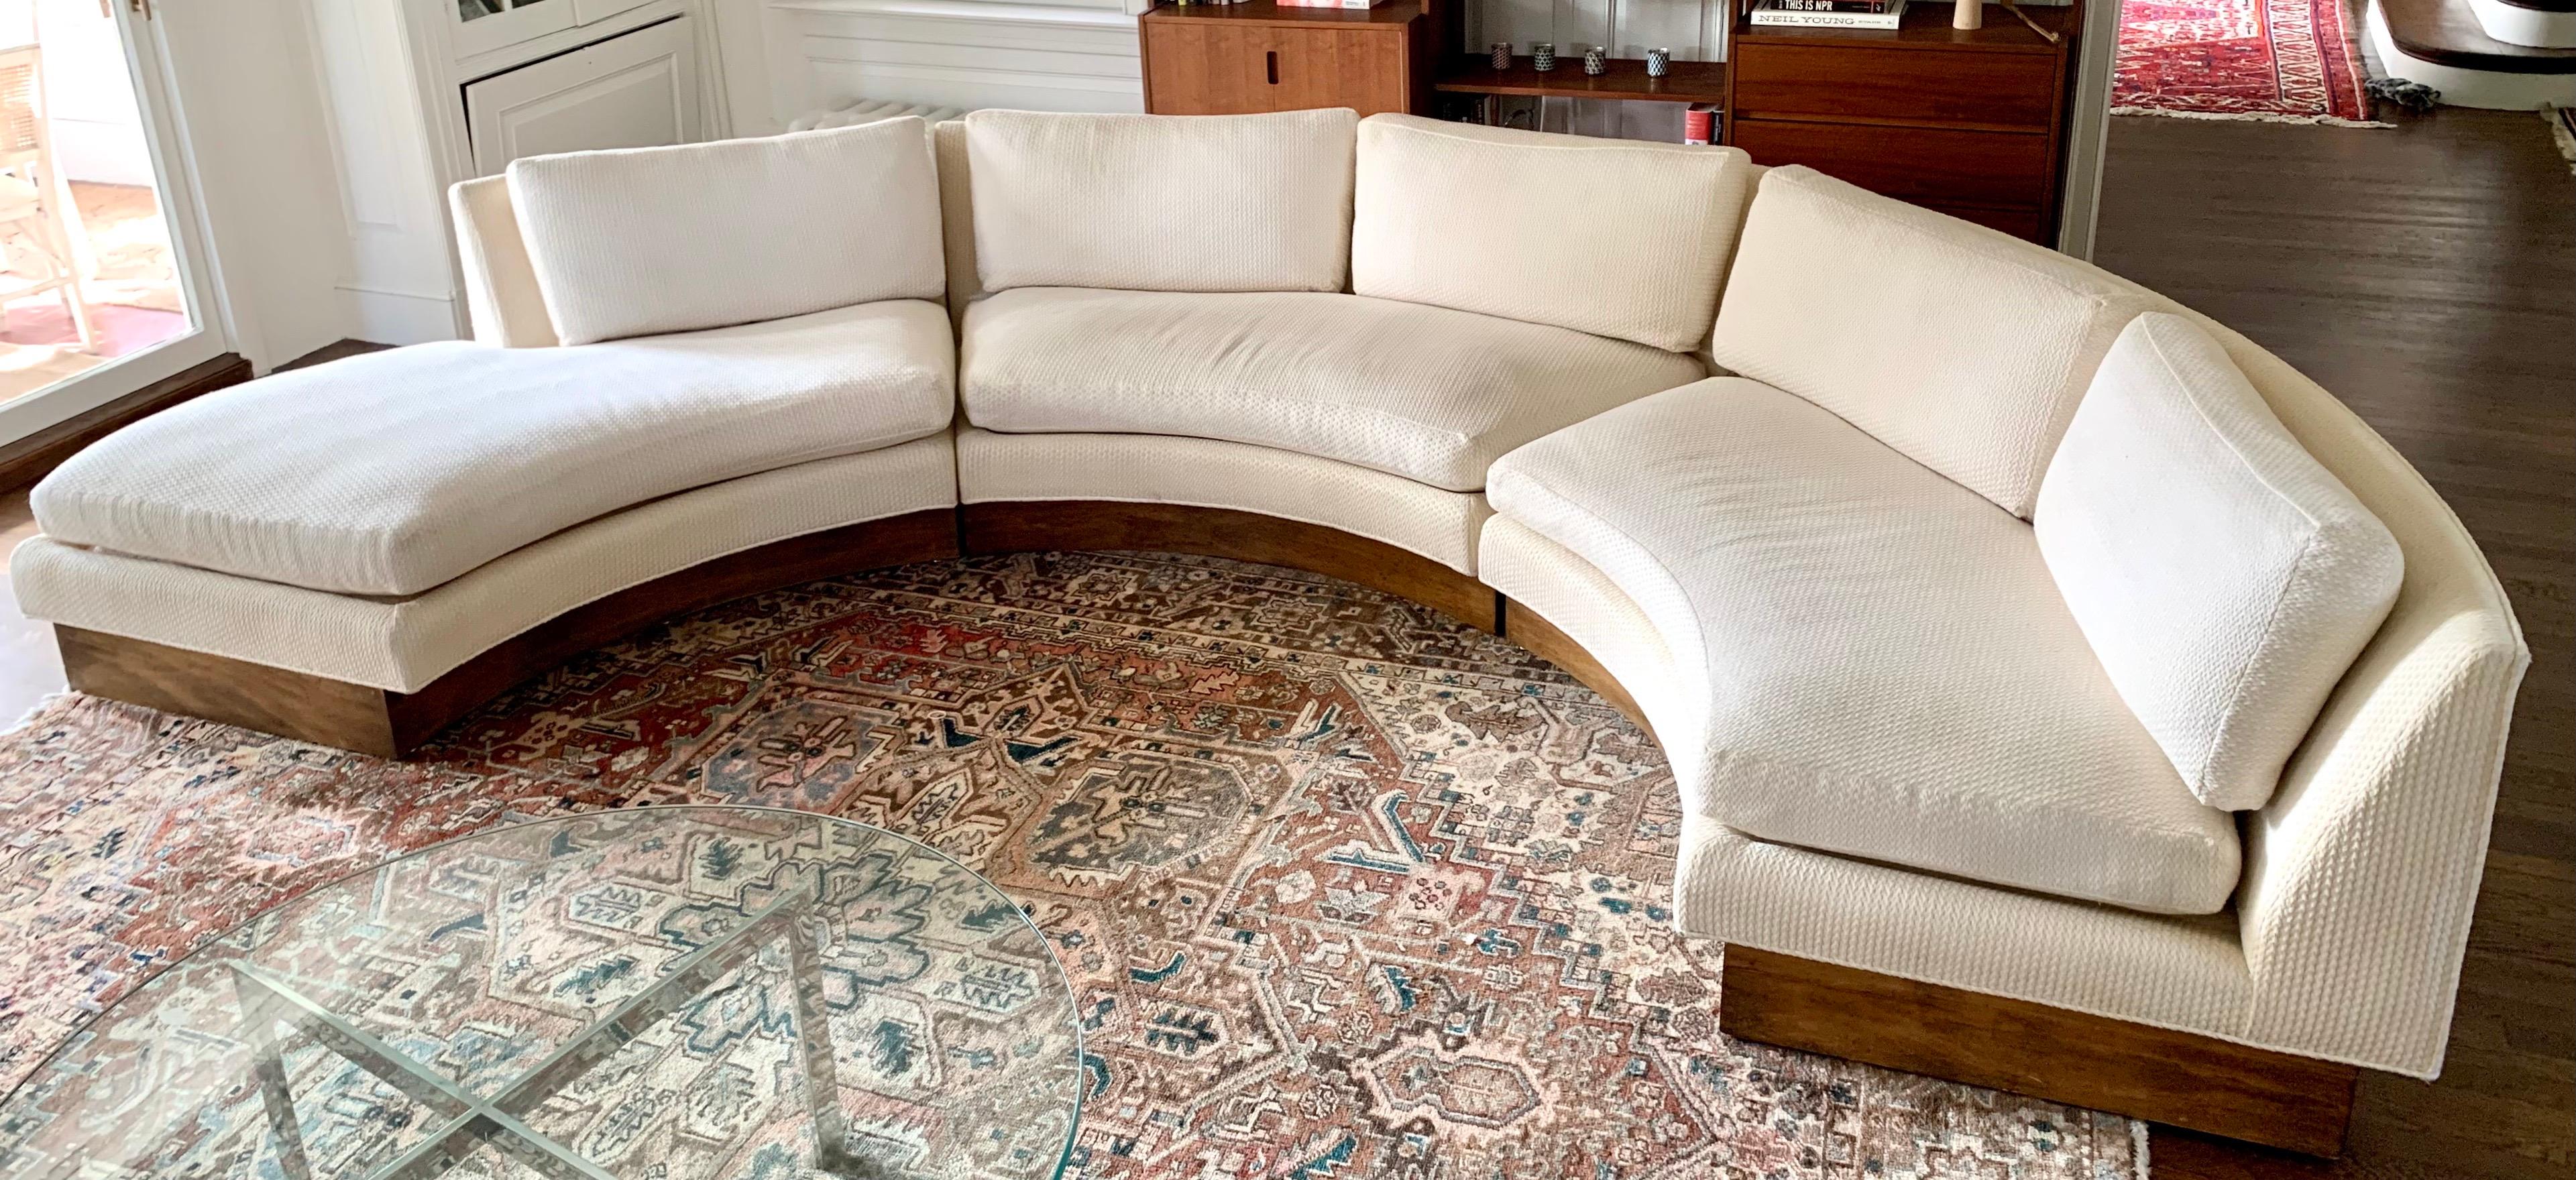 Stunning, large scale curved sectional sofa by esteemed Erwin Lambeth. Signatures on interior of pillows.
It is shaped as a semi-circle and sits on a walnut plinth. There is some minor chipping on the back of the walnut plinth as shown in pics. The